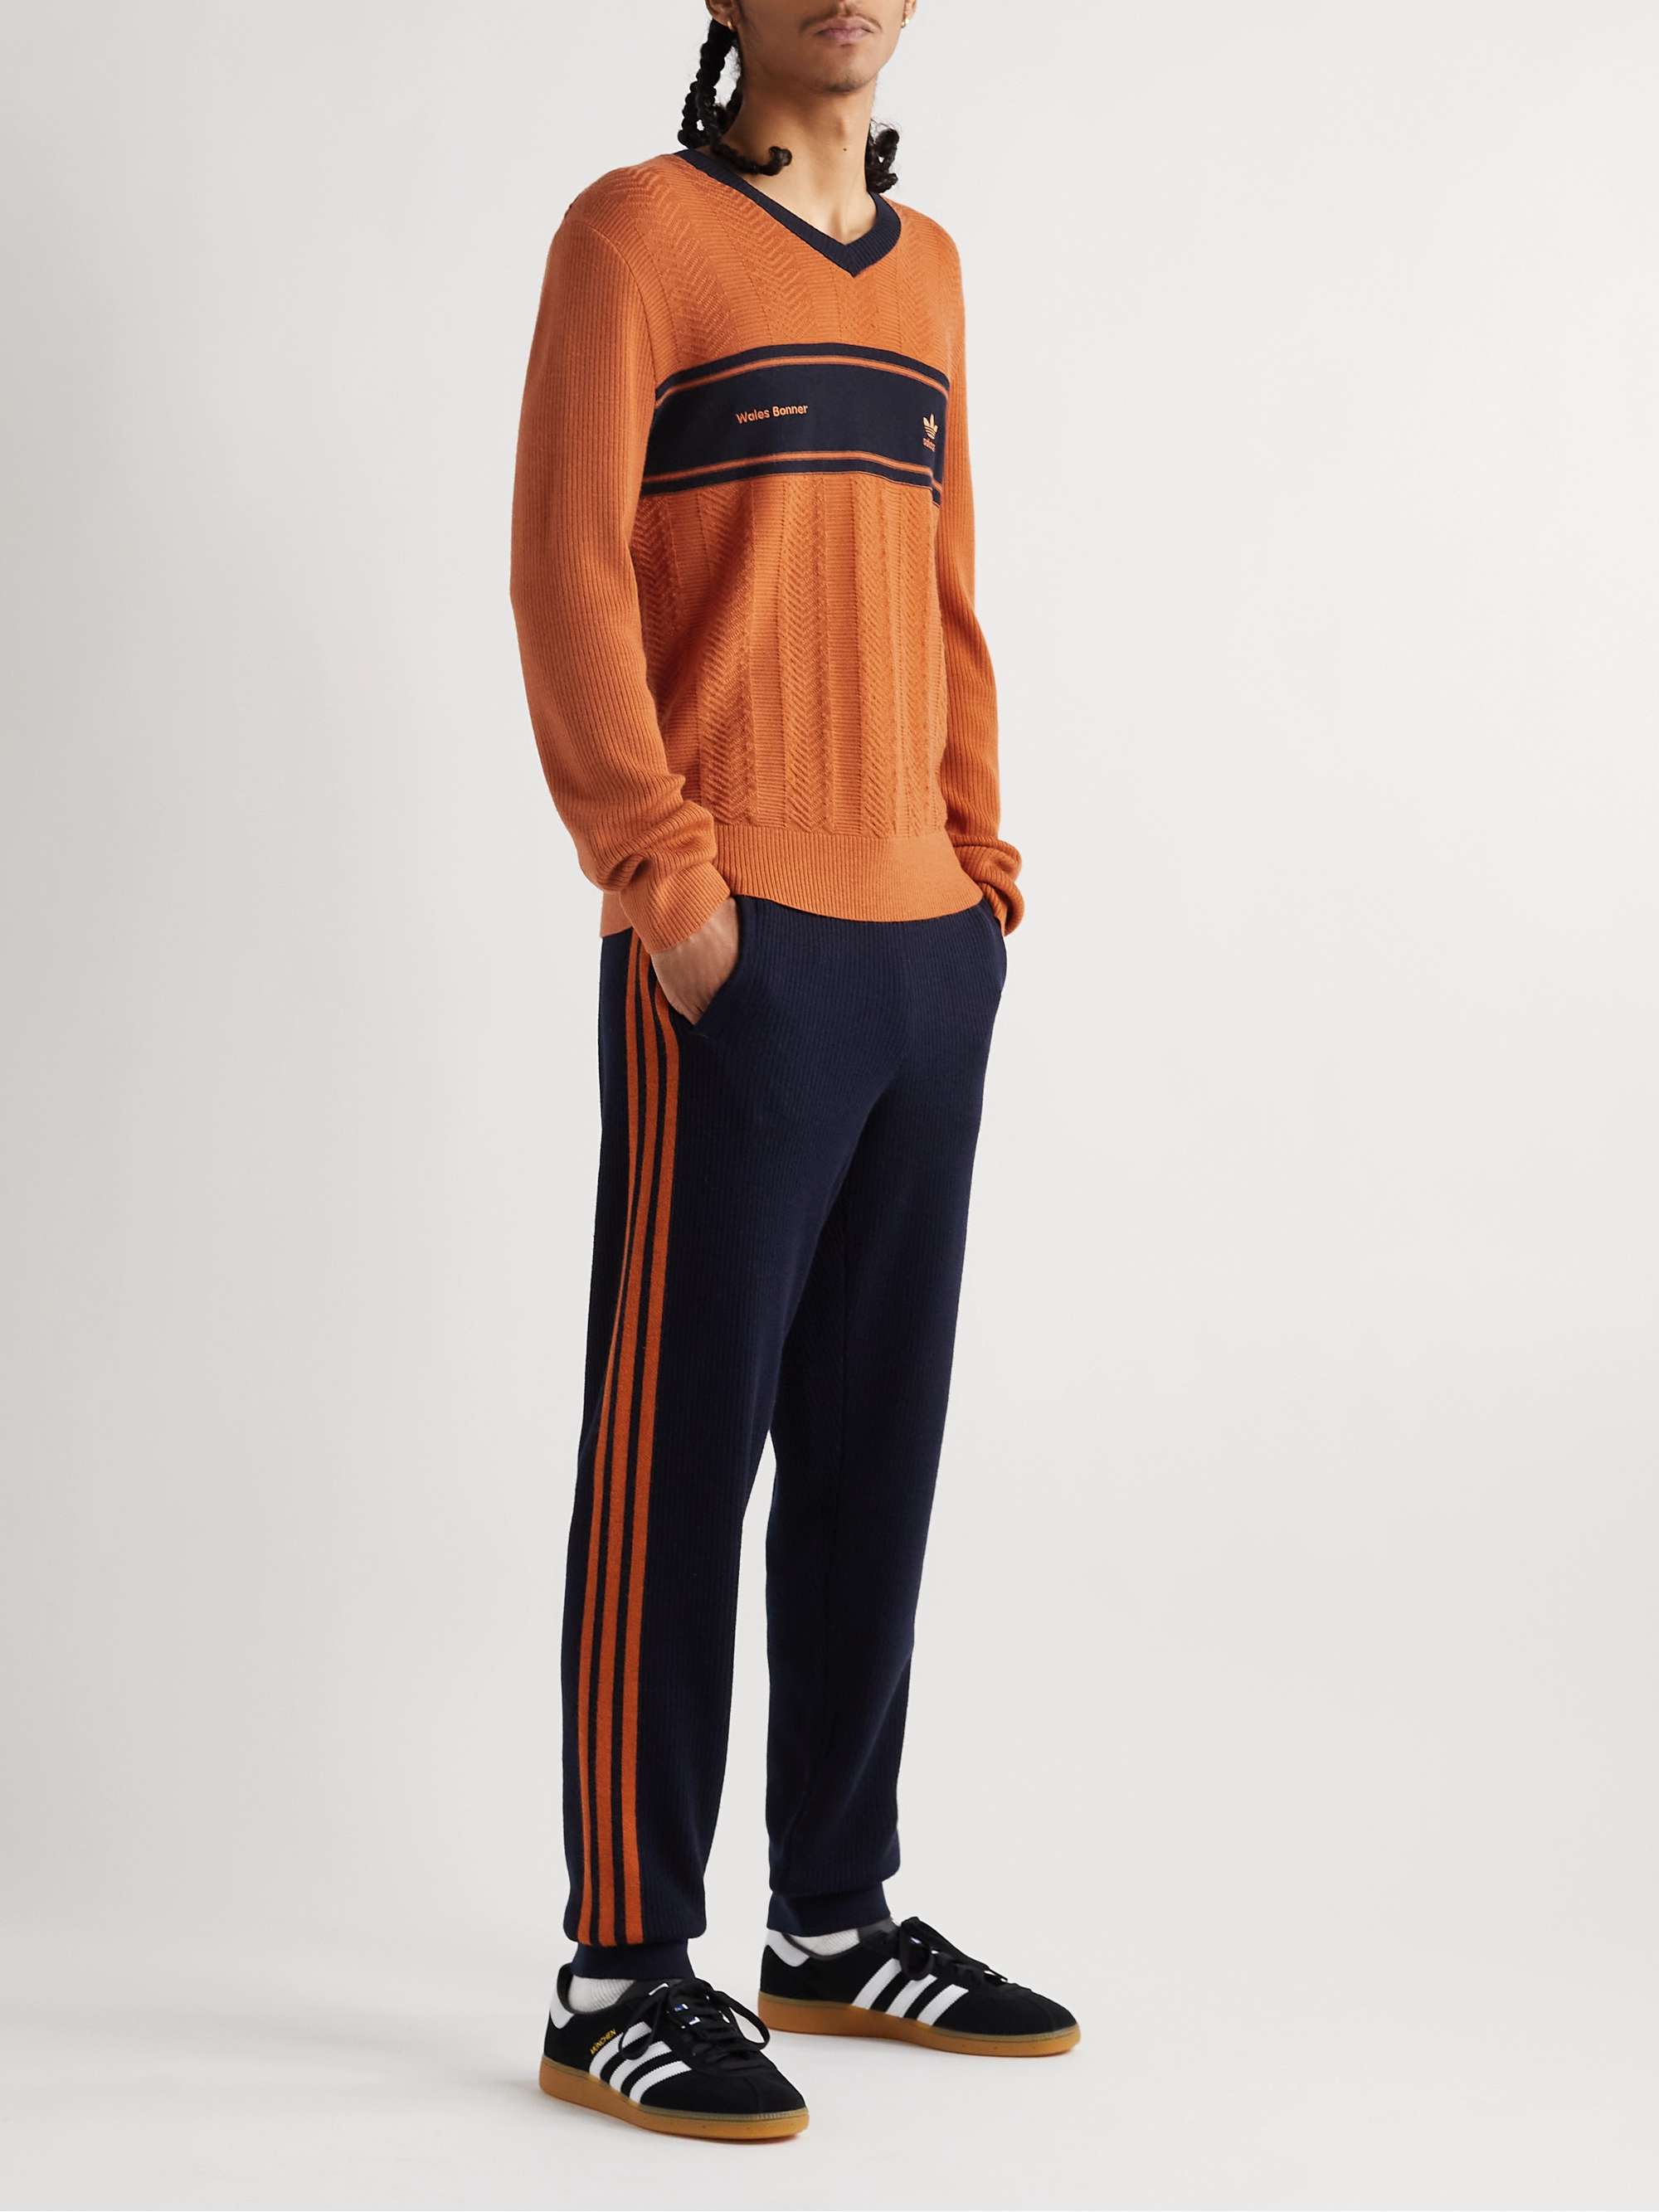 ADIDAS CONSORTIUM + Wales Bonner Striped Embroidered Ribbed Wool-Blend Sweater